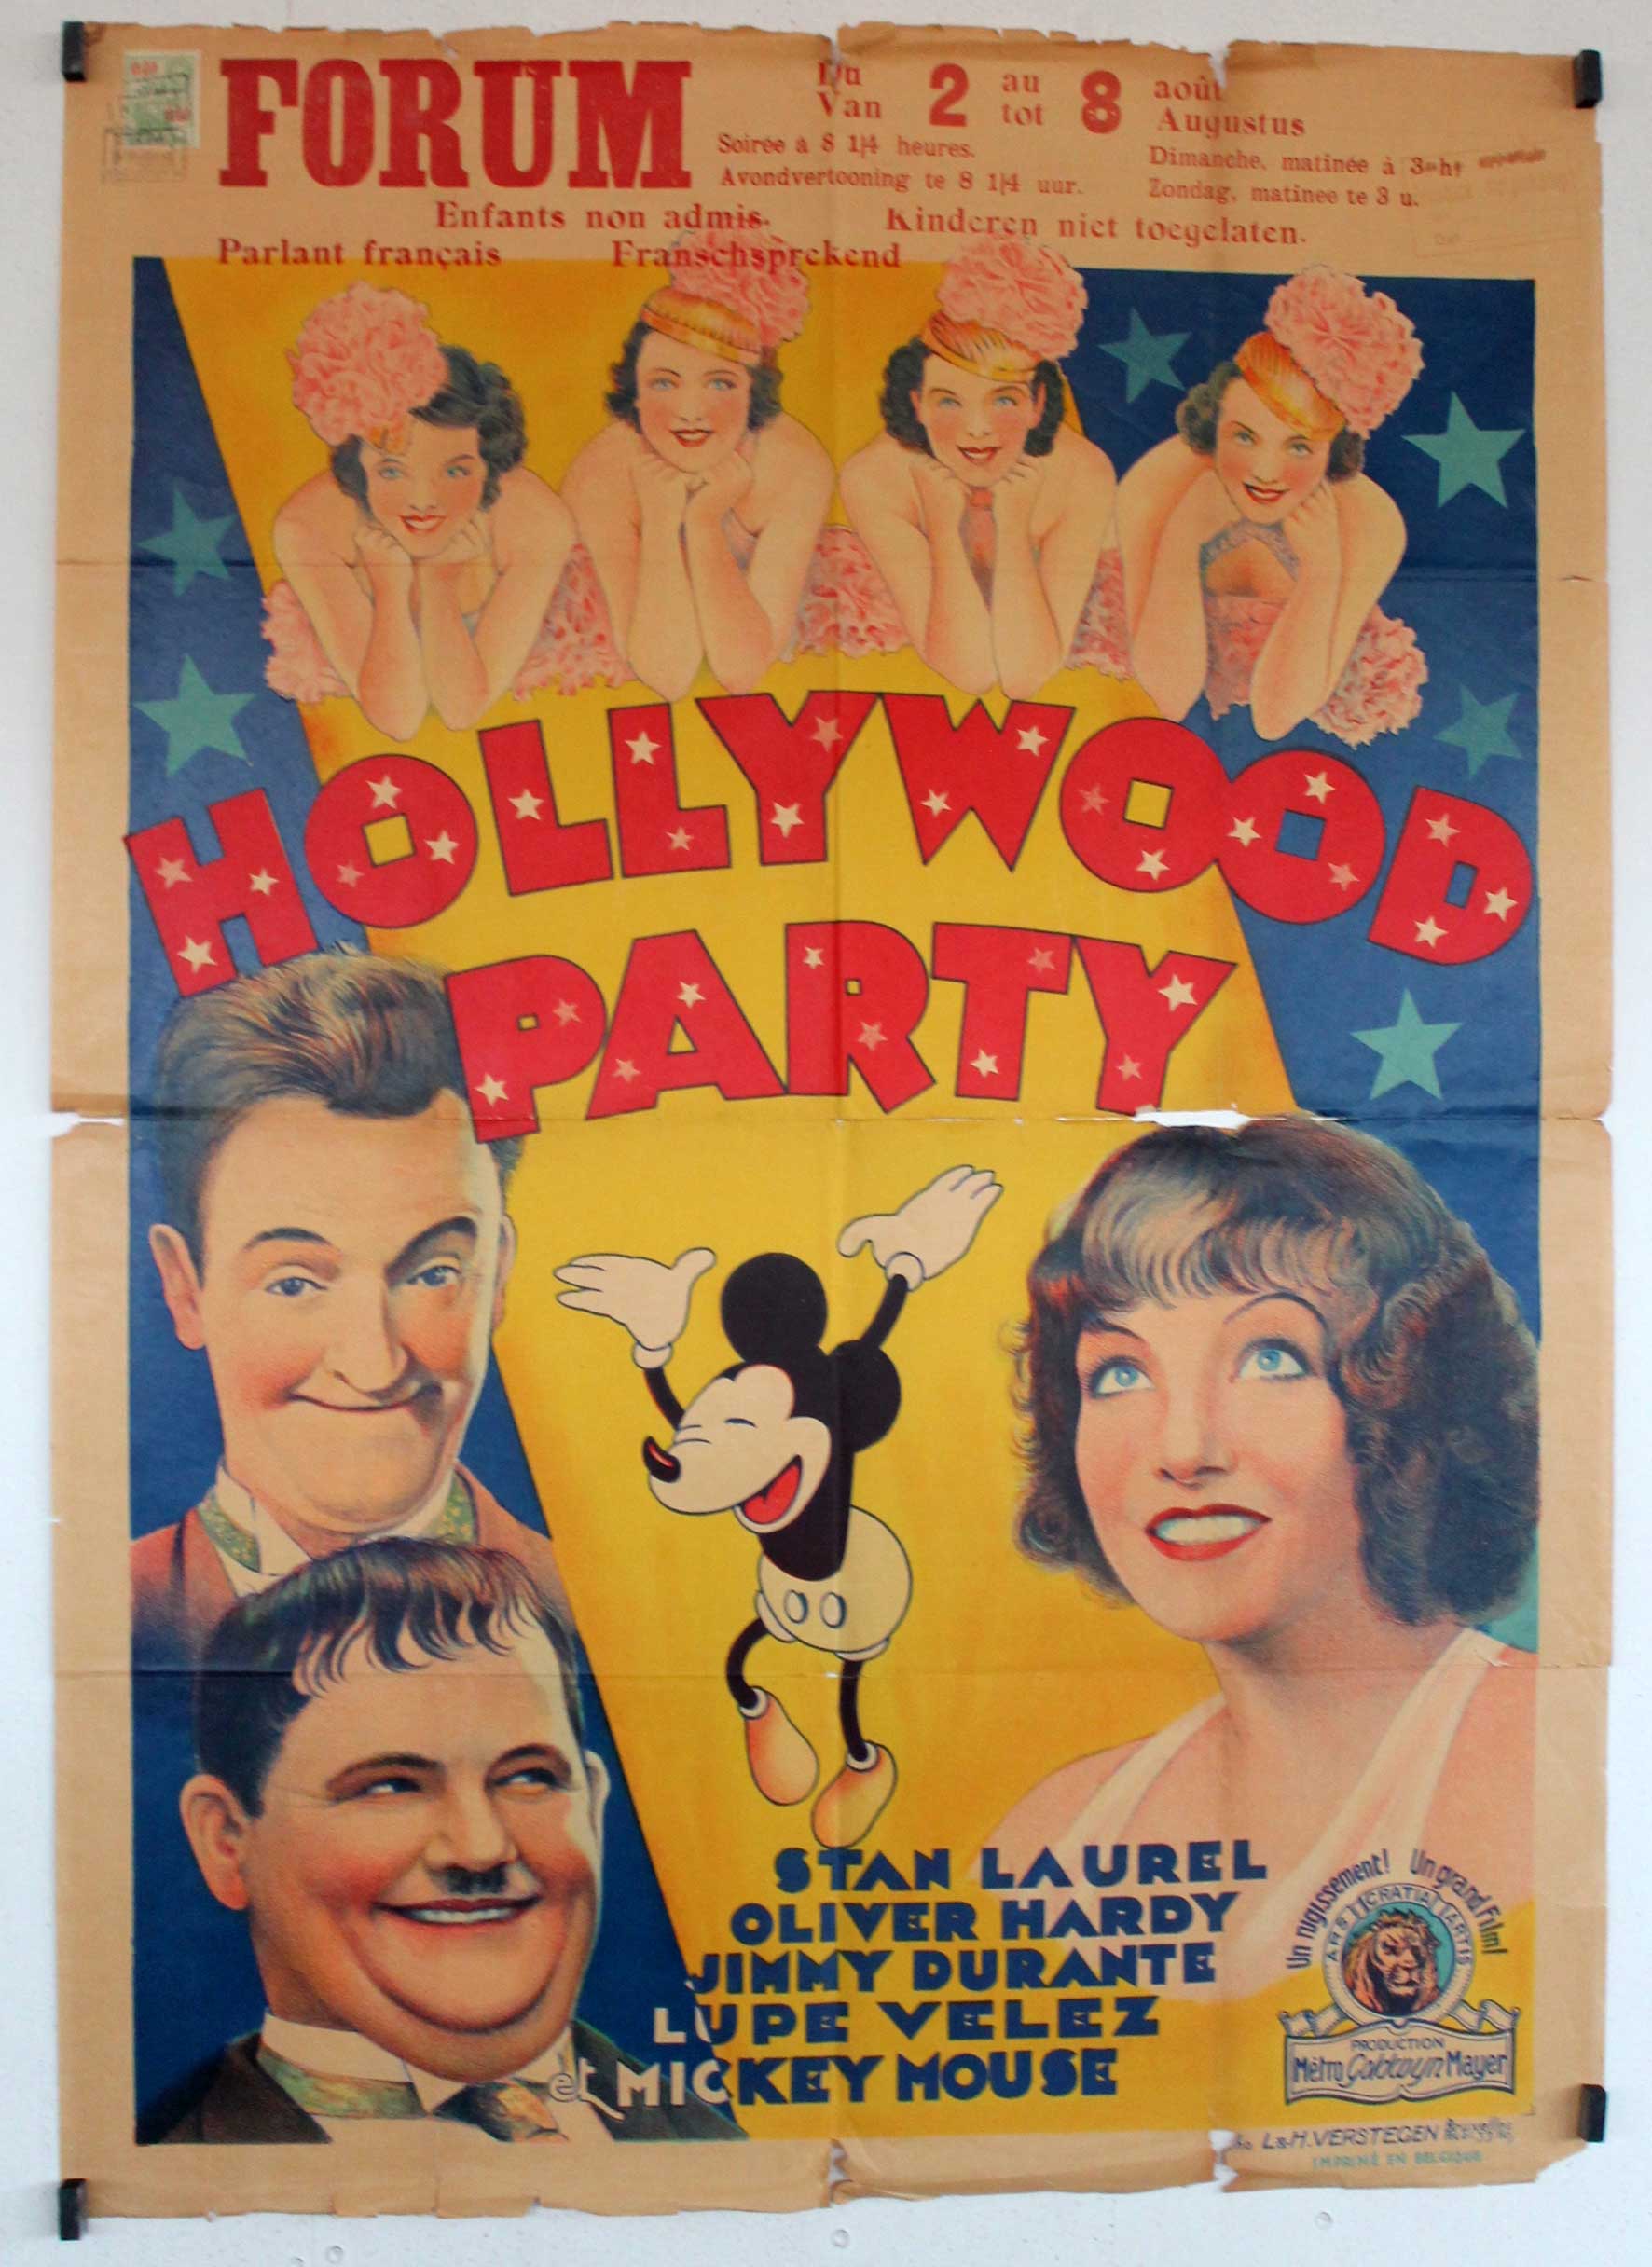 HOLLYWOOD PARTY